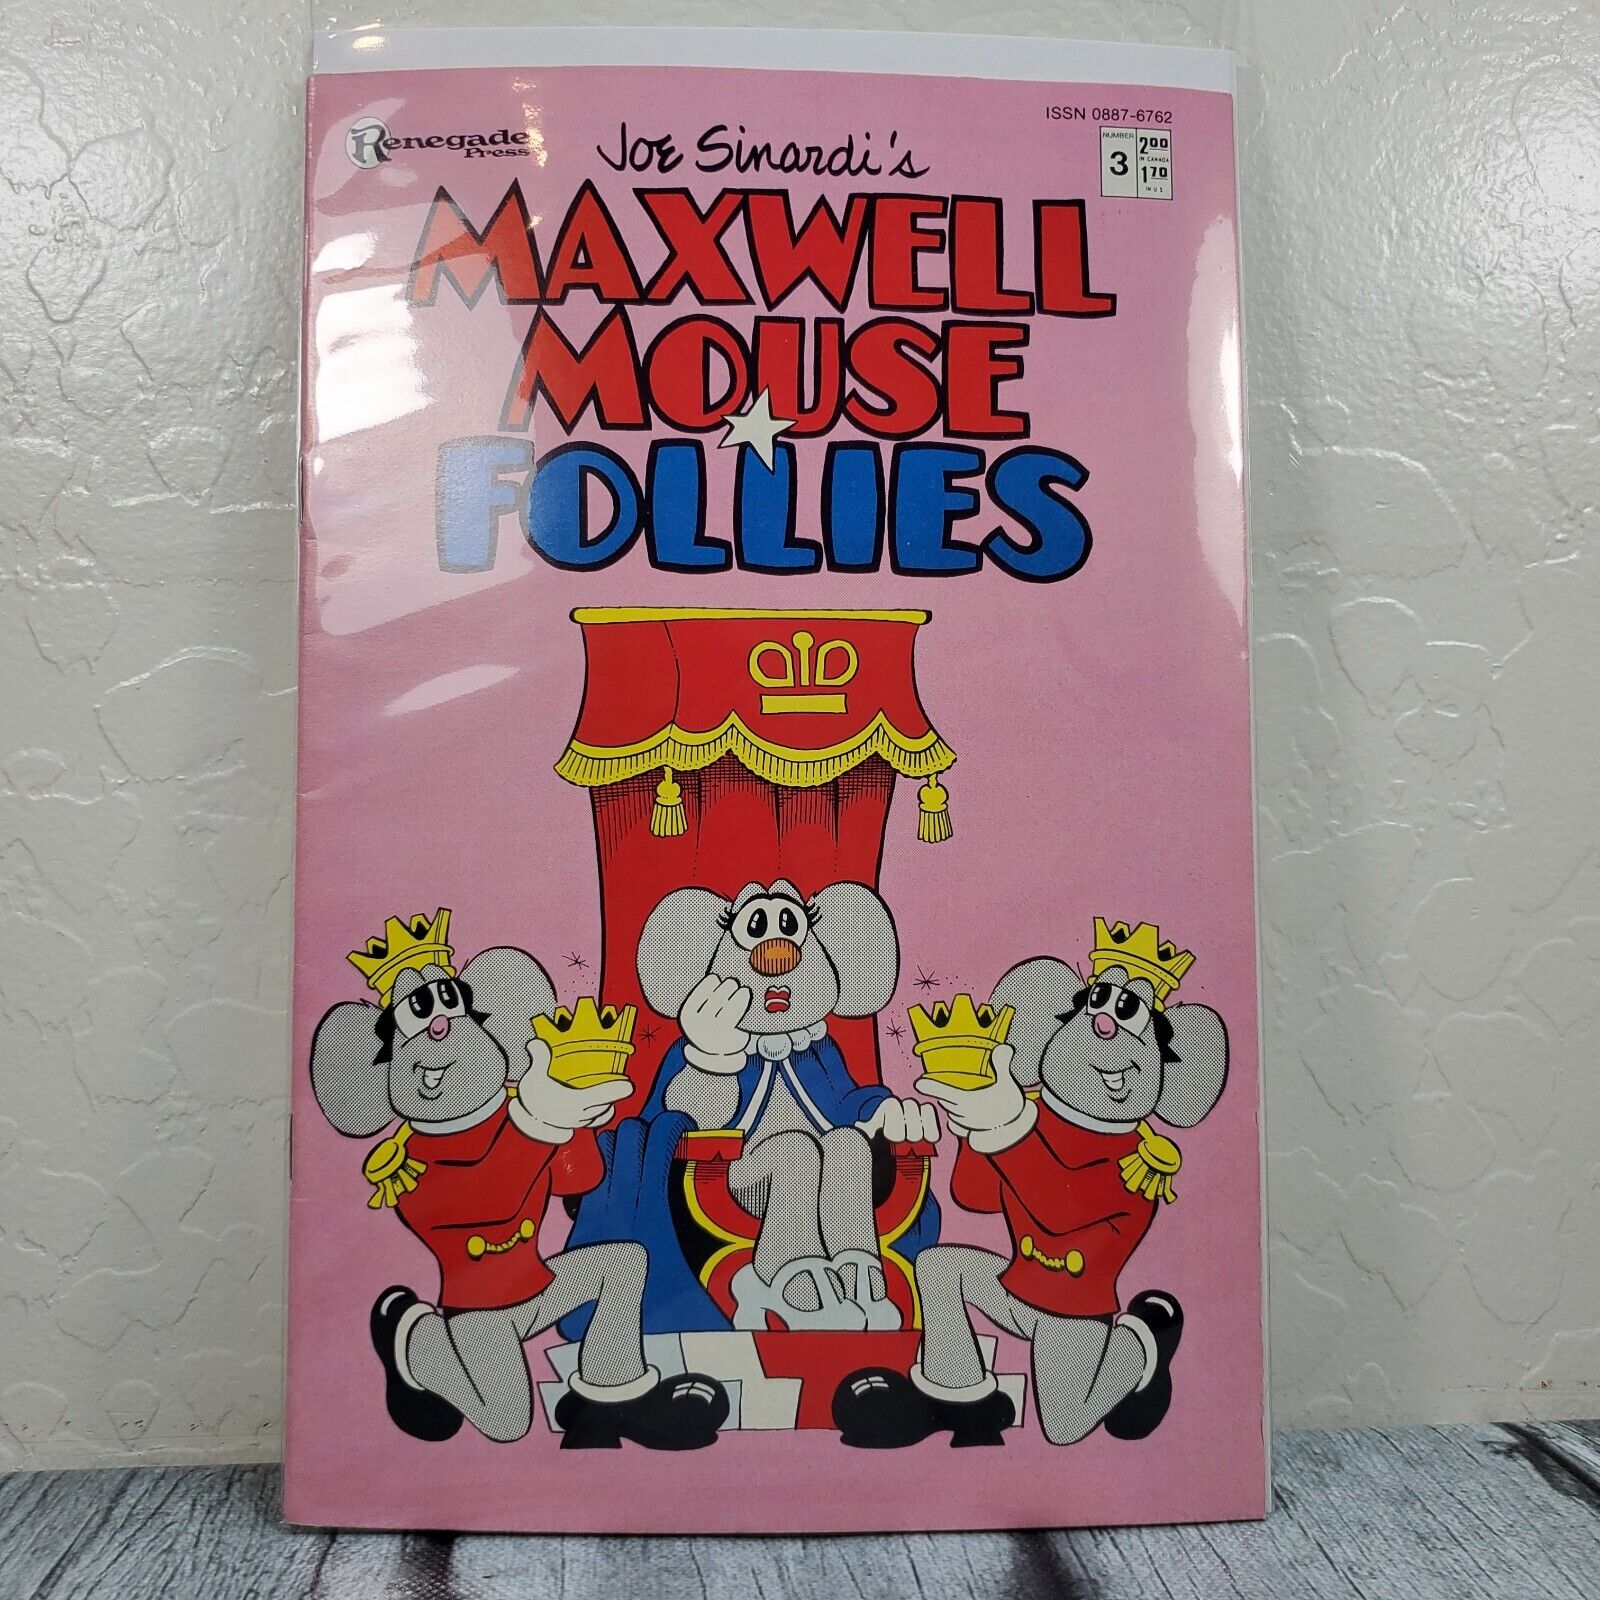 Renegade Press Maxwell Mouse Follies #3 1986 Vintage Comic Book Sleeved Boarded